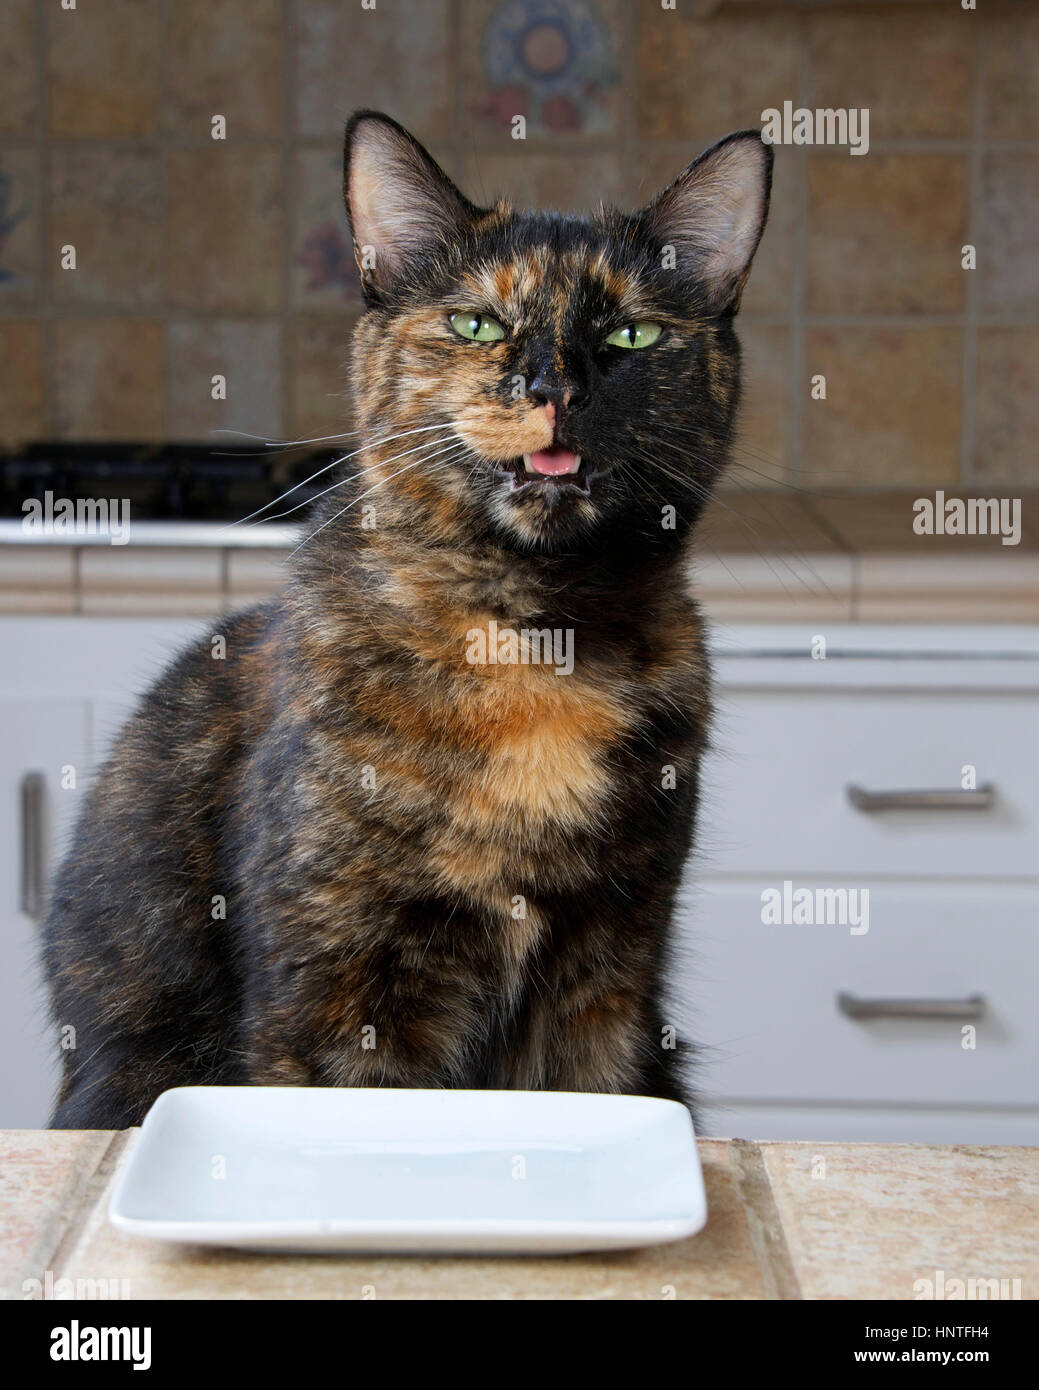 Tortoiseshell or Tortie Tabby cat sitting at the counter with an empty plate waiting for food. Mouth open looks like talking. Stock Photo